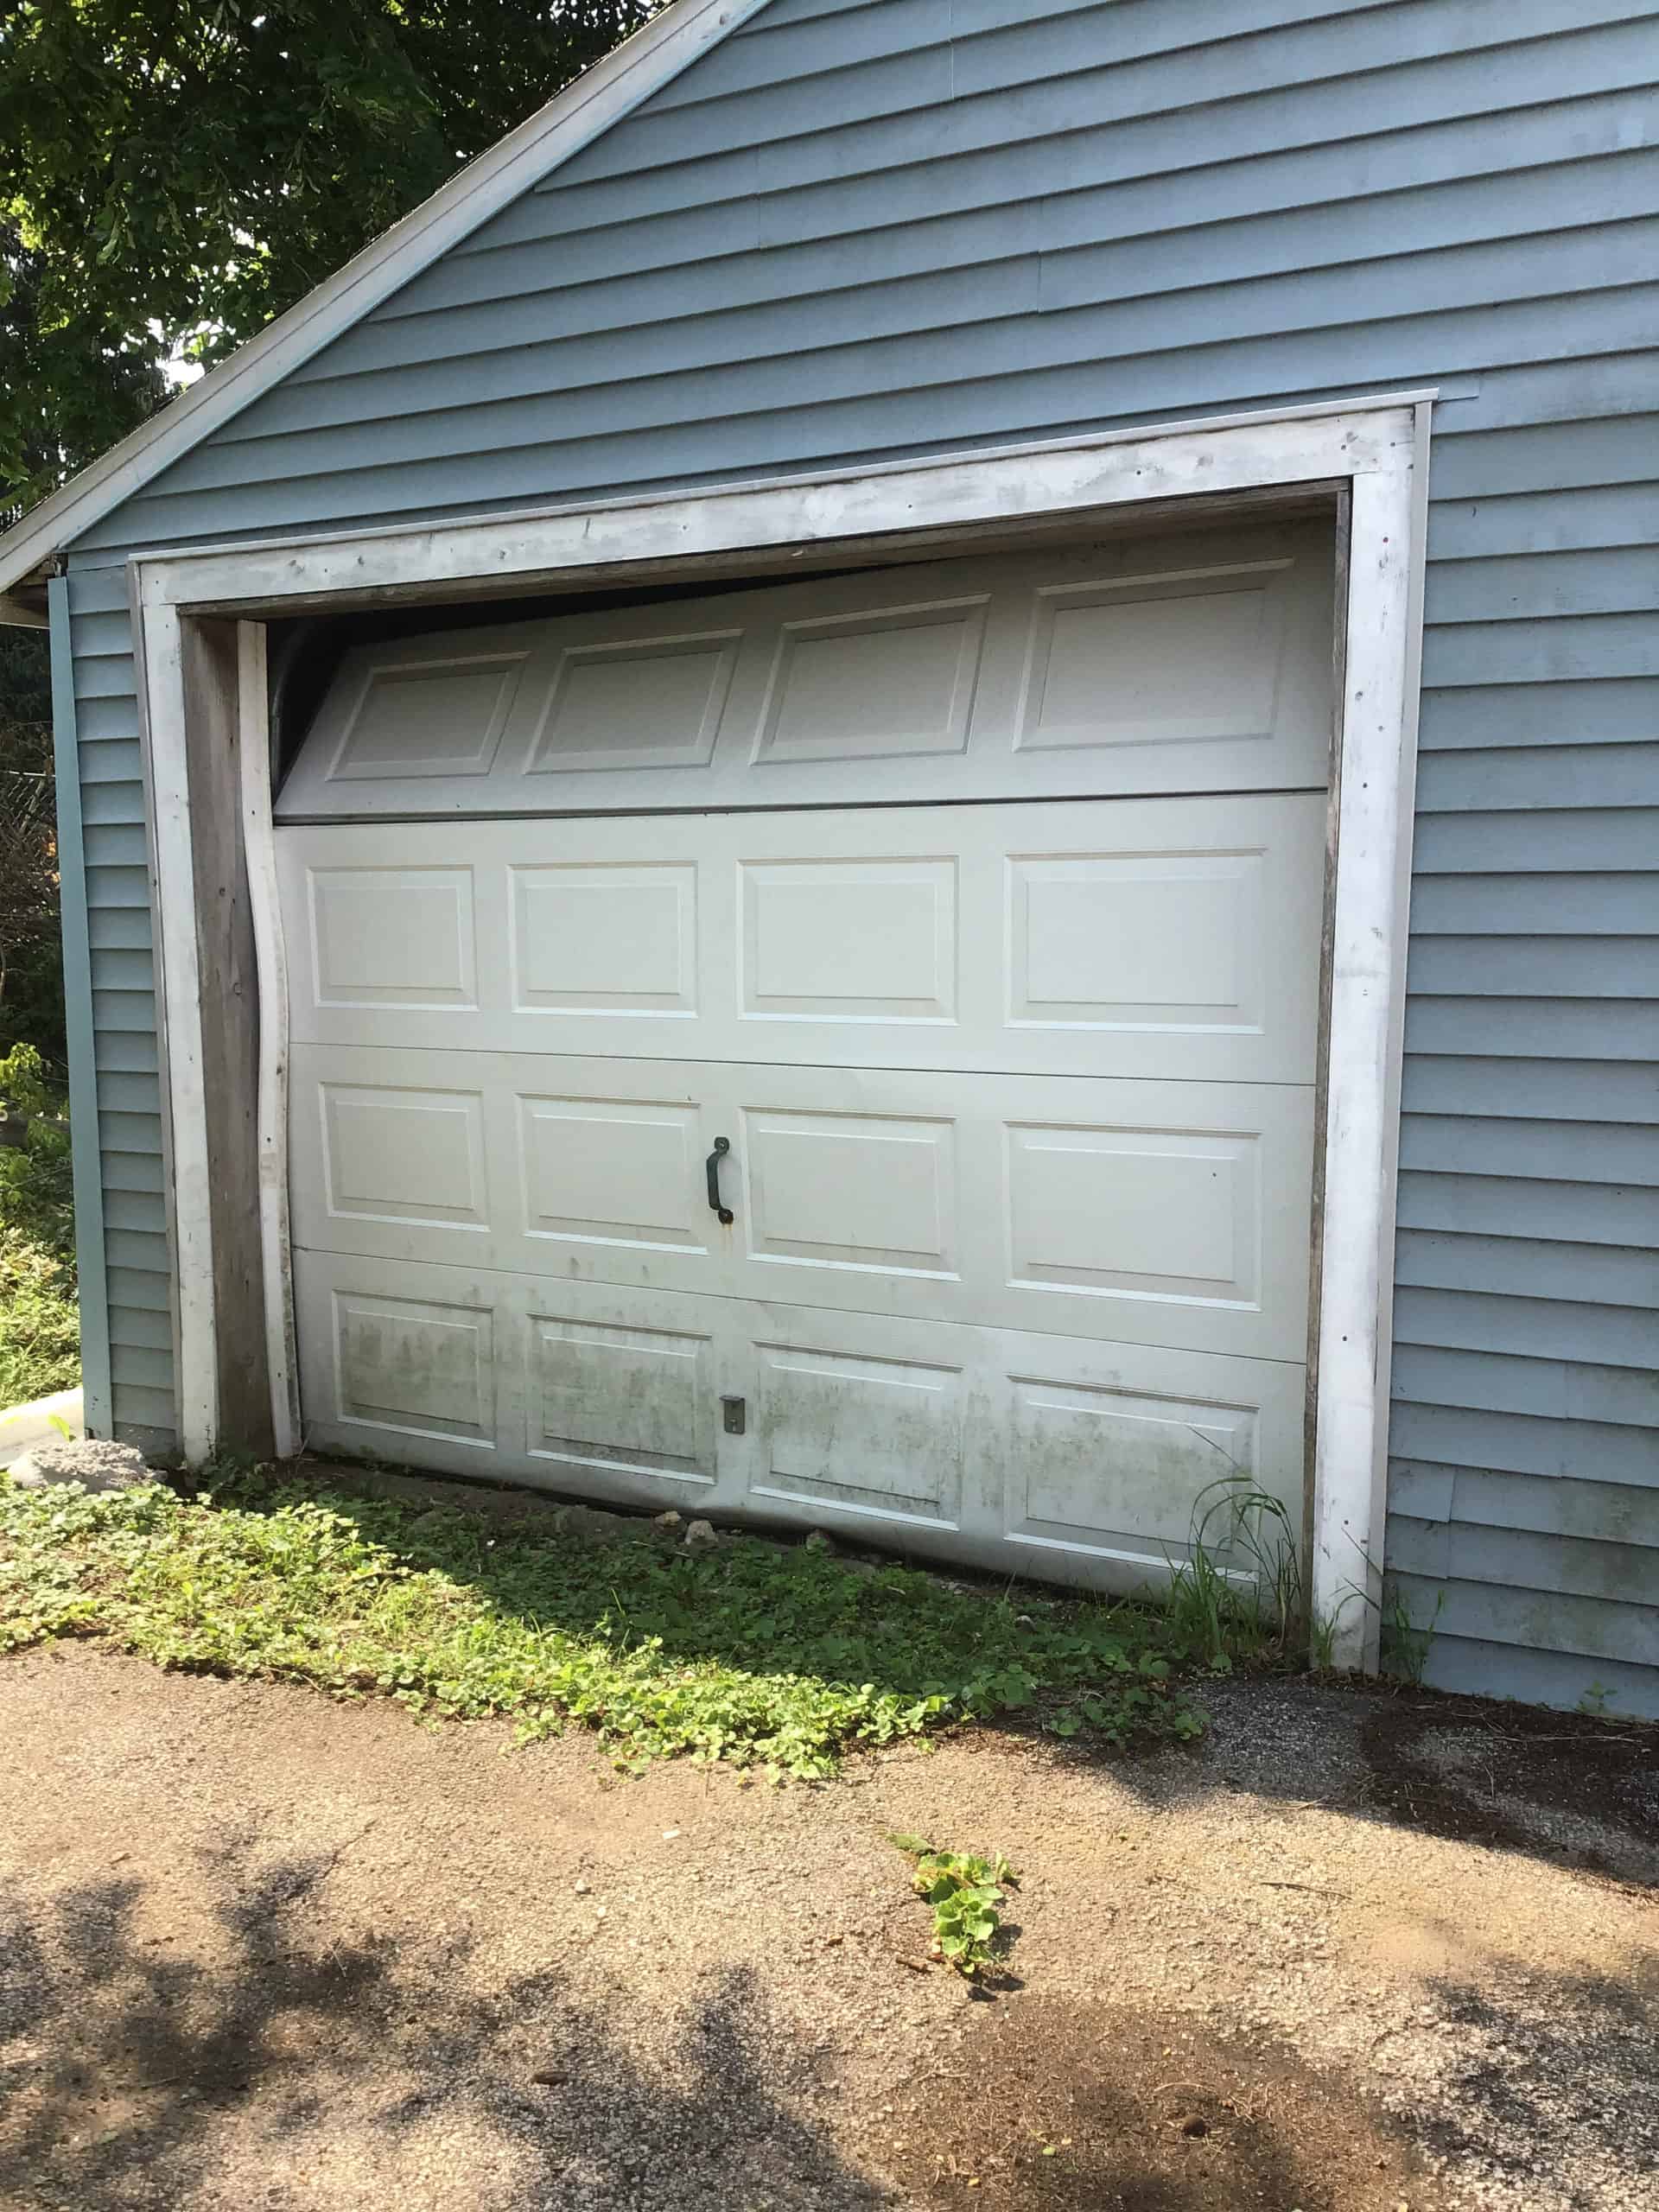 Off track garage door repair and replacement in Lake County, Illinois